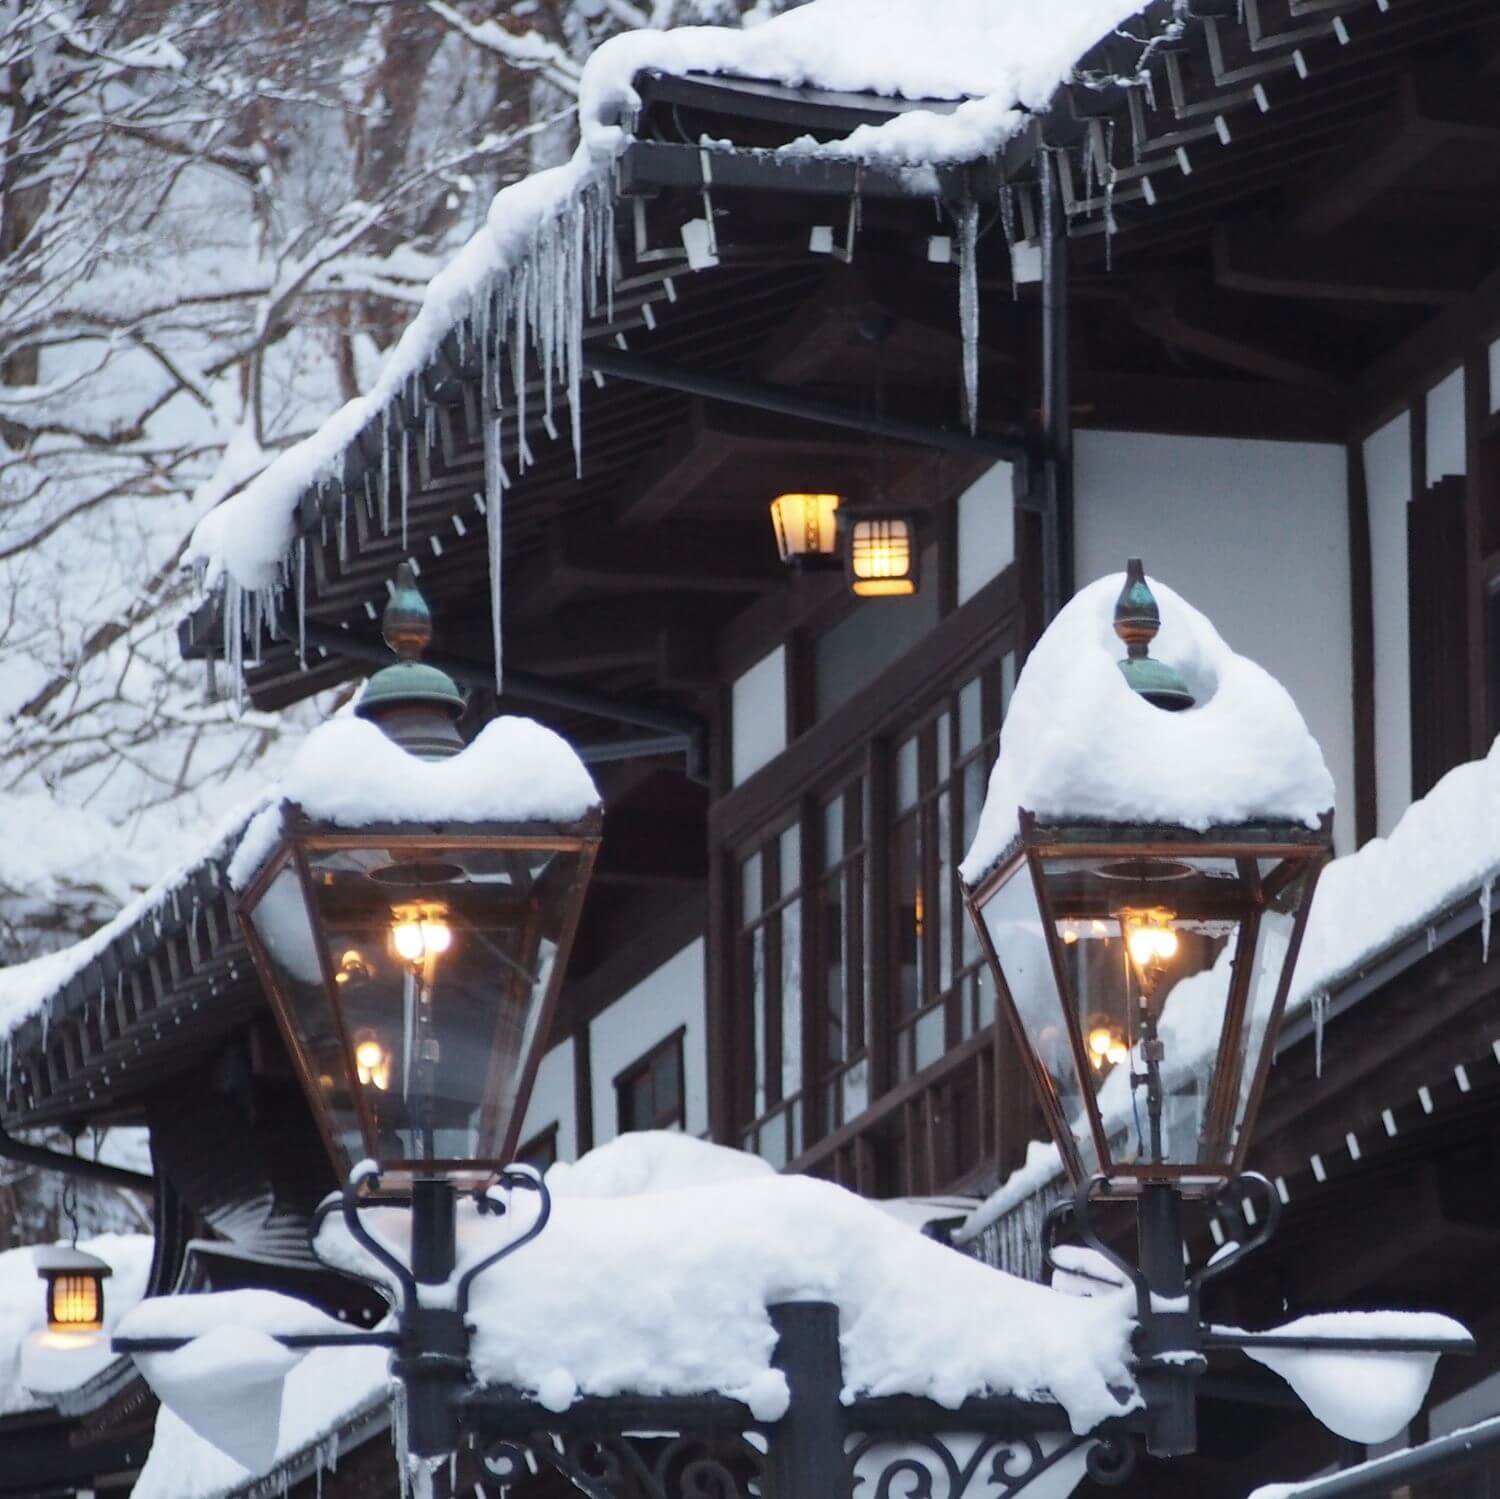 Ginzan Onsen, a retro hot spring town with a beautiful snow scene, Yamagata 2